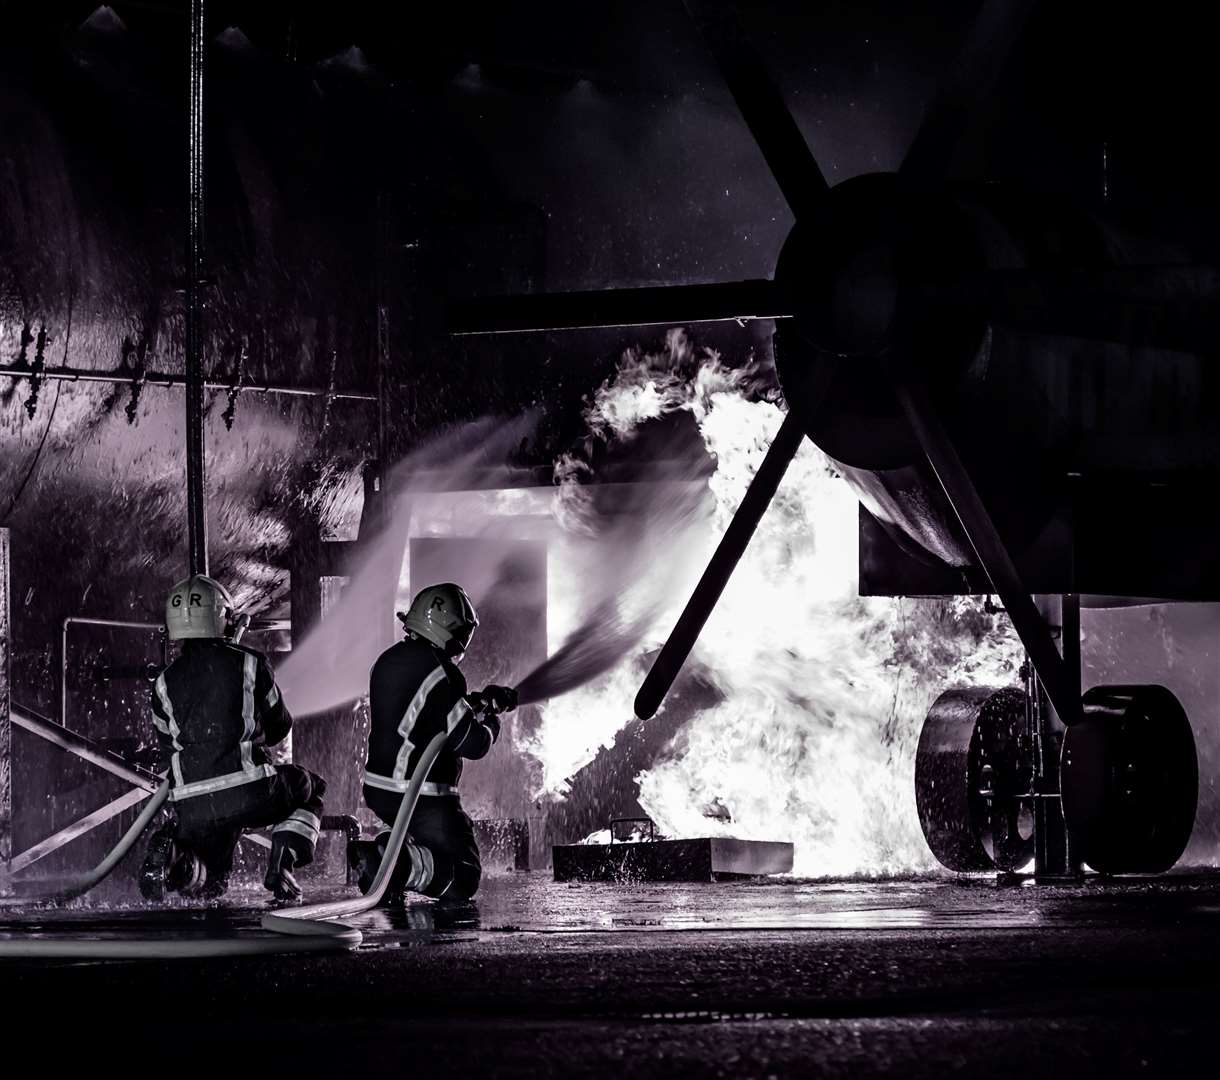 Ally Mackechnie's monochrome image of firefighters tackling the blaze in training.